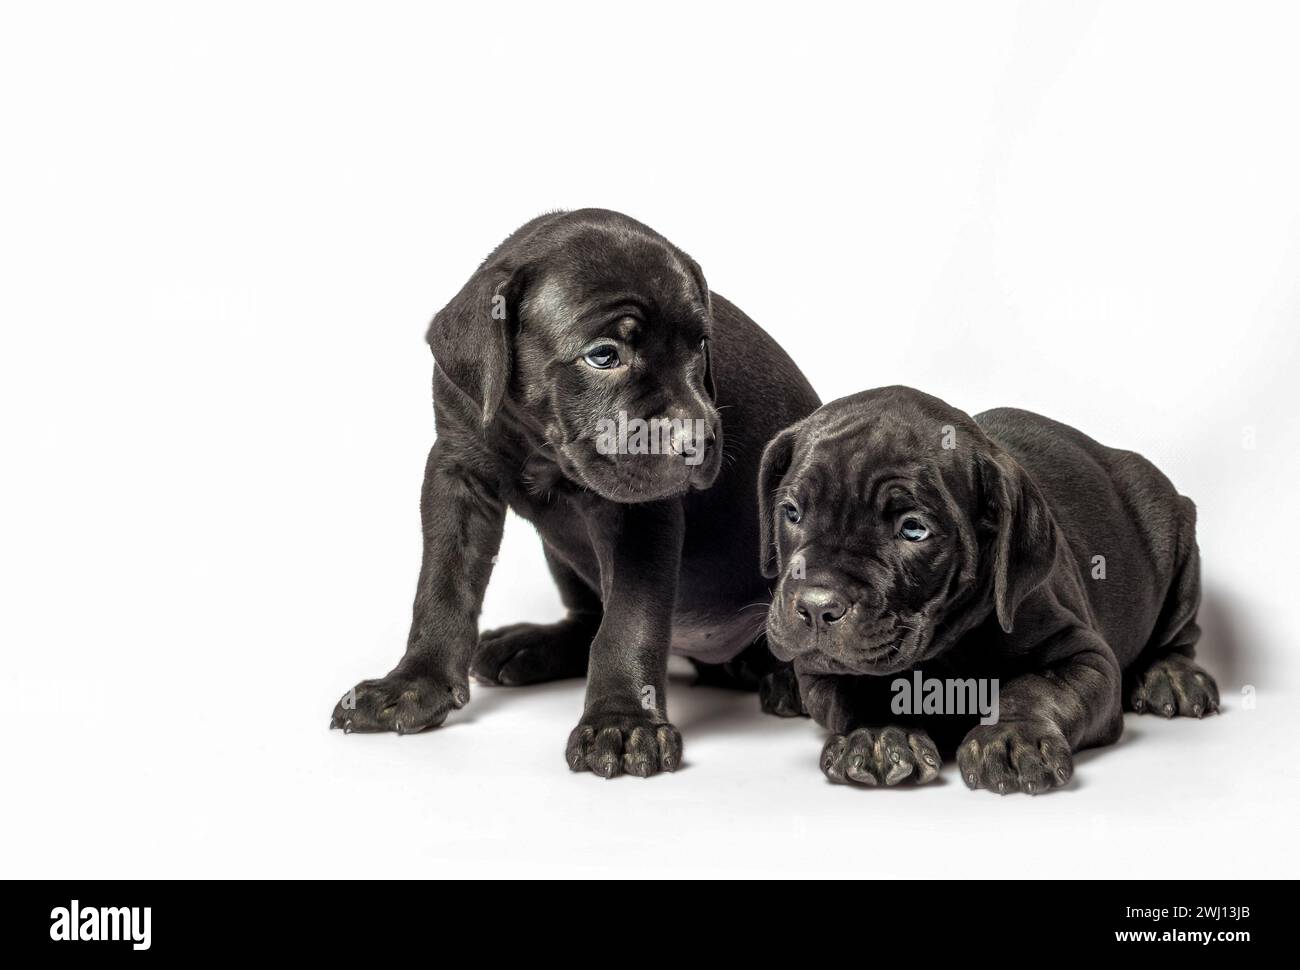 Two identical twin puppies of breed canecorso on a white background Stock Photo